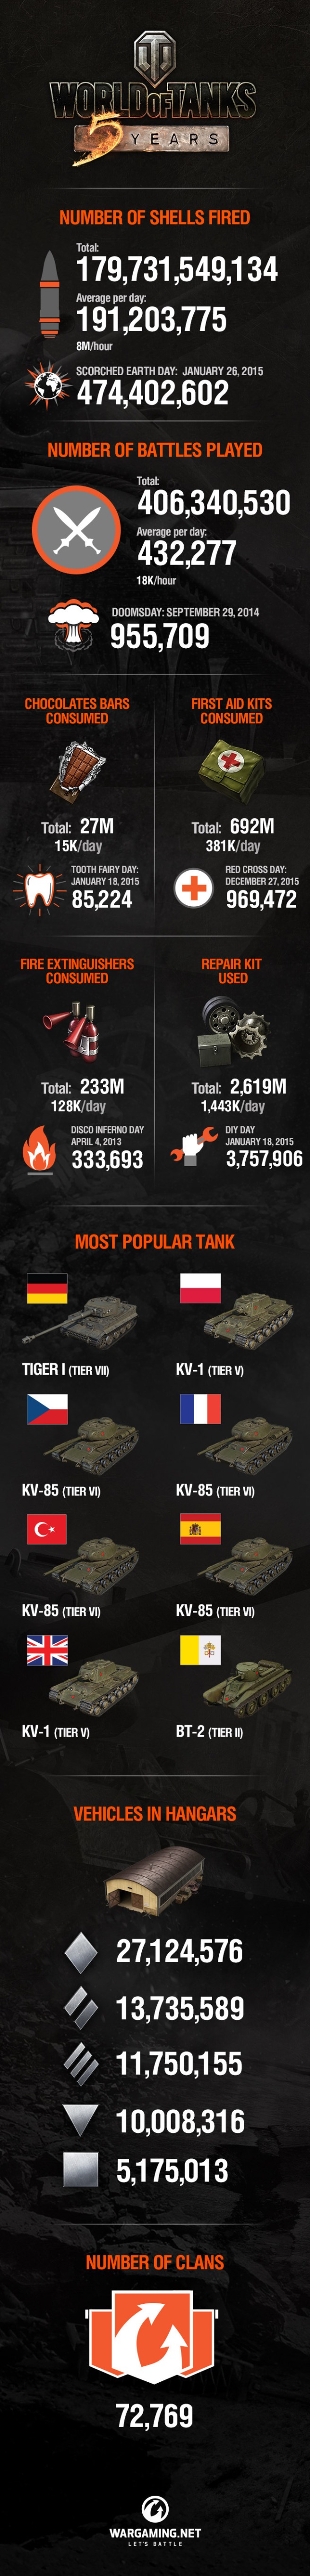 wot_infographic_5thanniversary_phil_eng